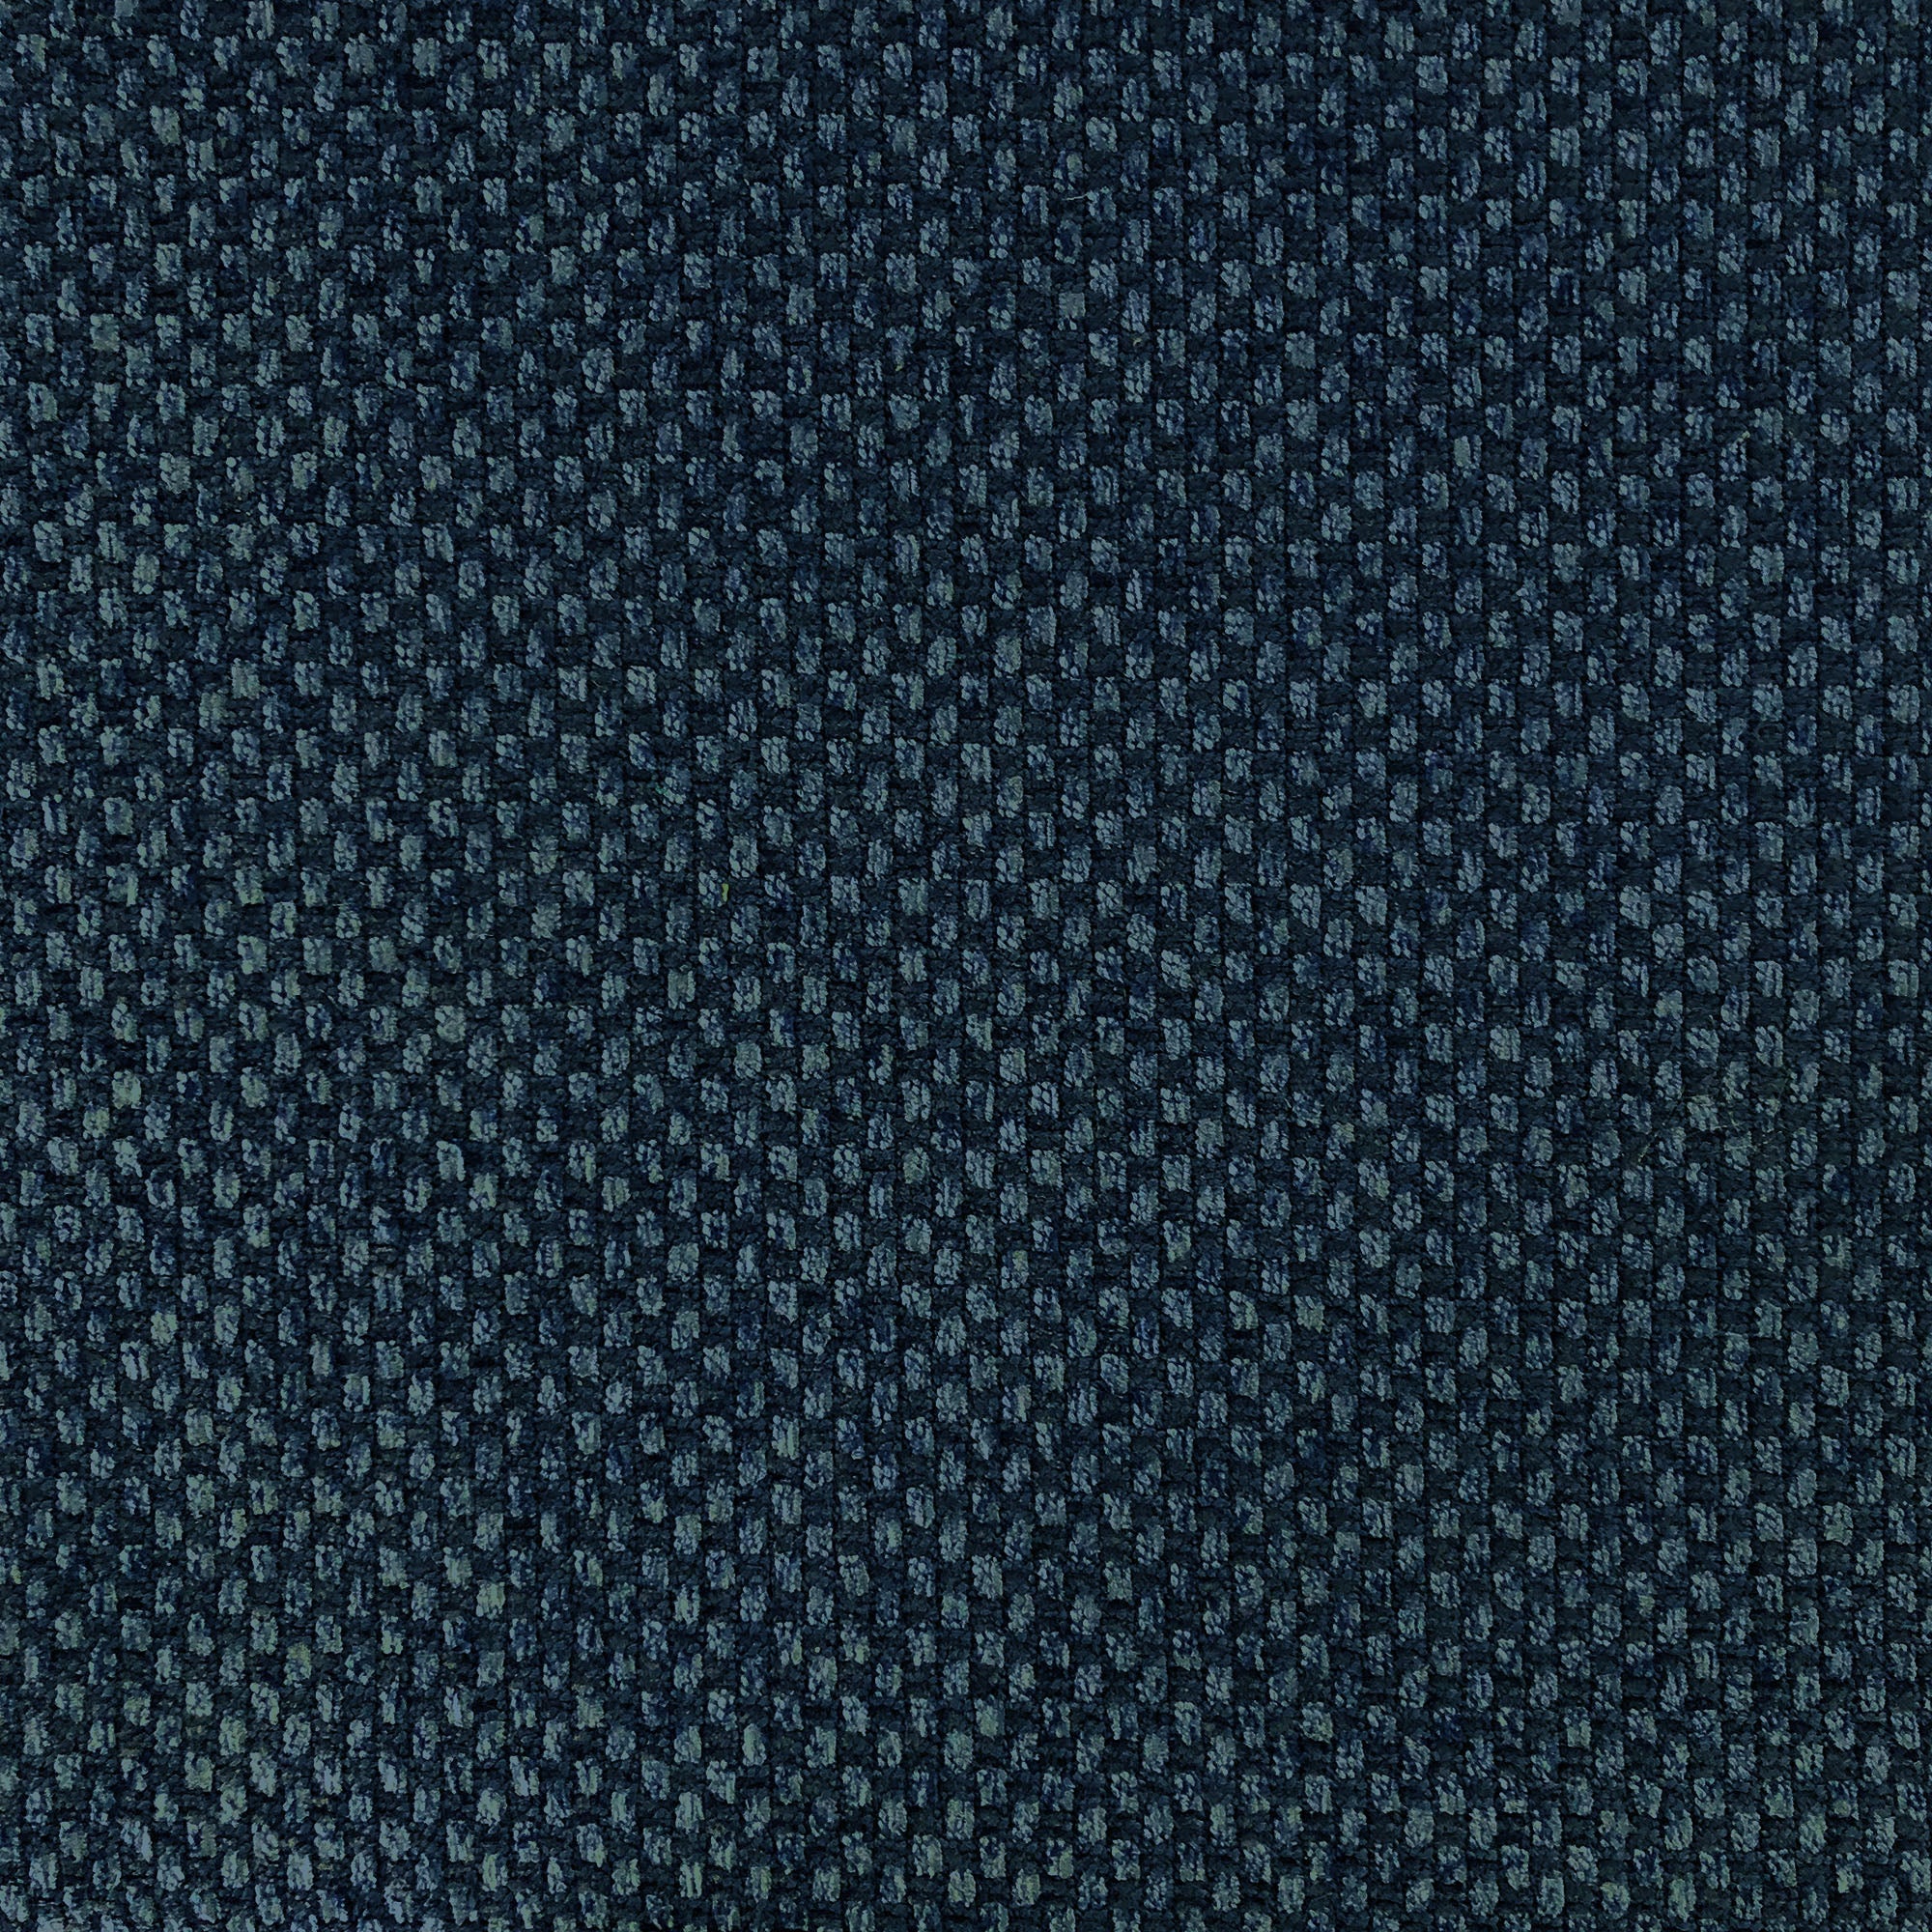 Dayla Fabric | Two Tone Woven Chenille